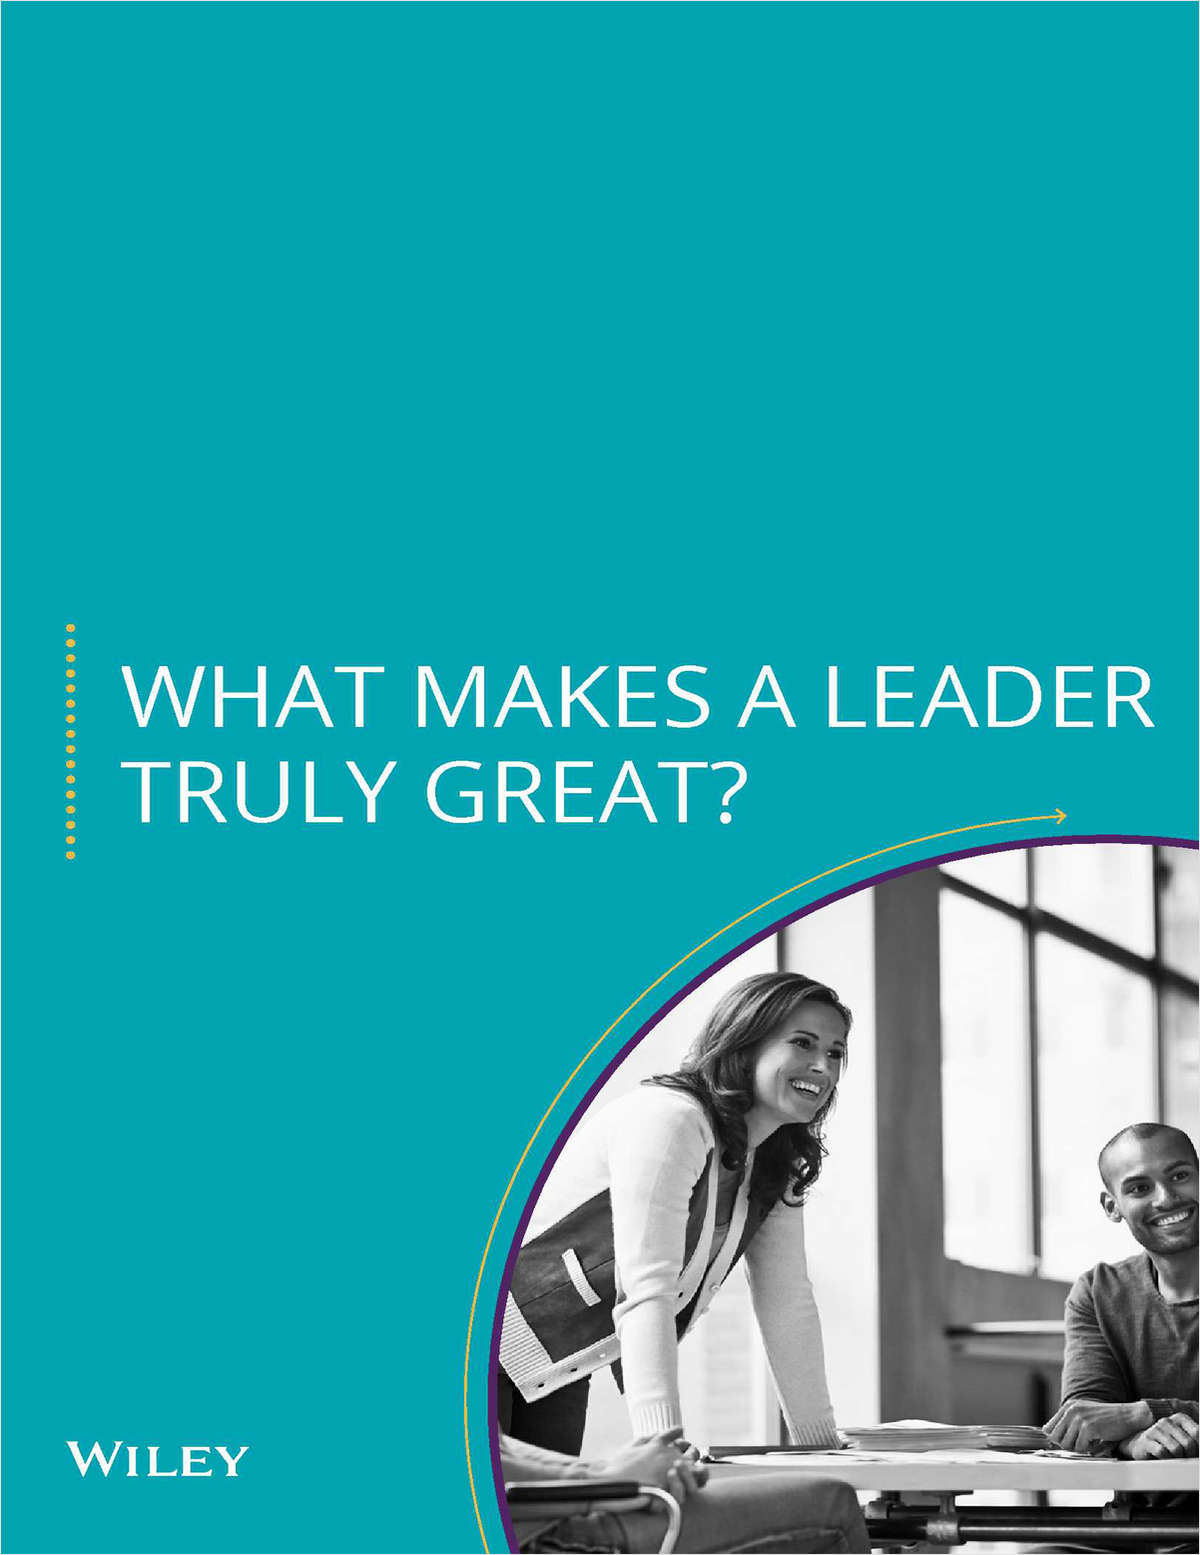 What Makes a Leader Truly Great?